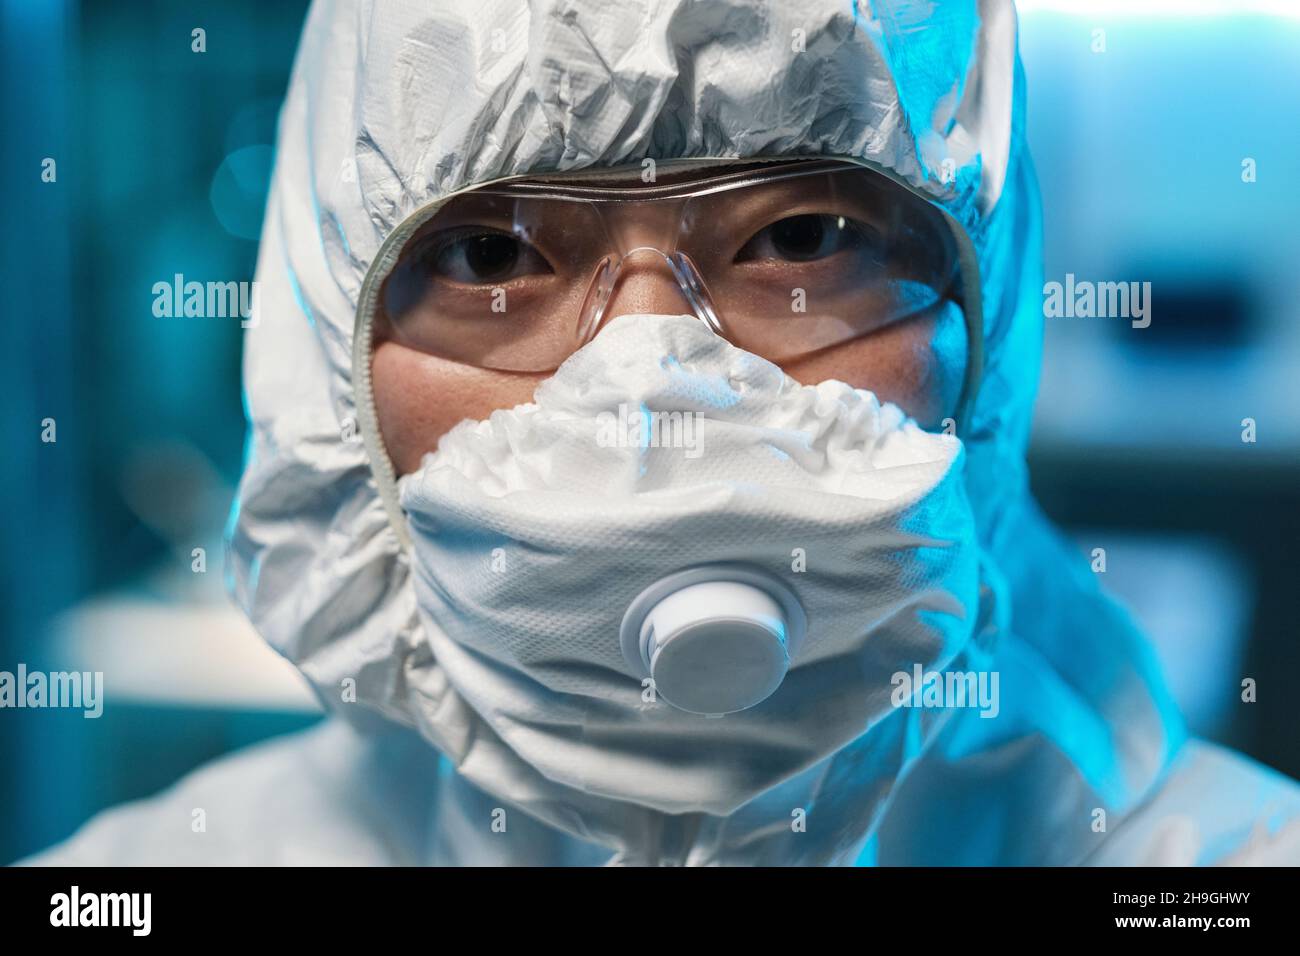 Face of young Asian female scientist in protective respirator, eyeglasses and coveralls Stock Photo